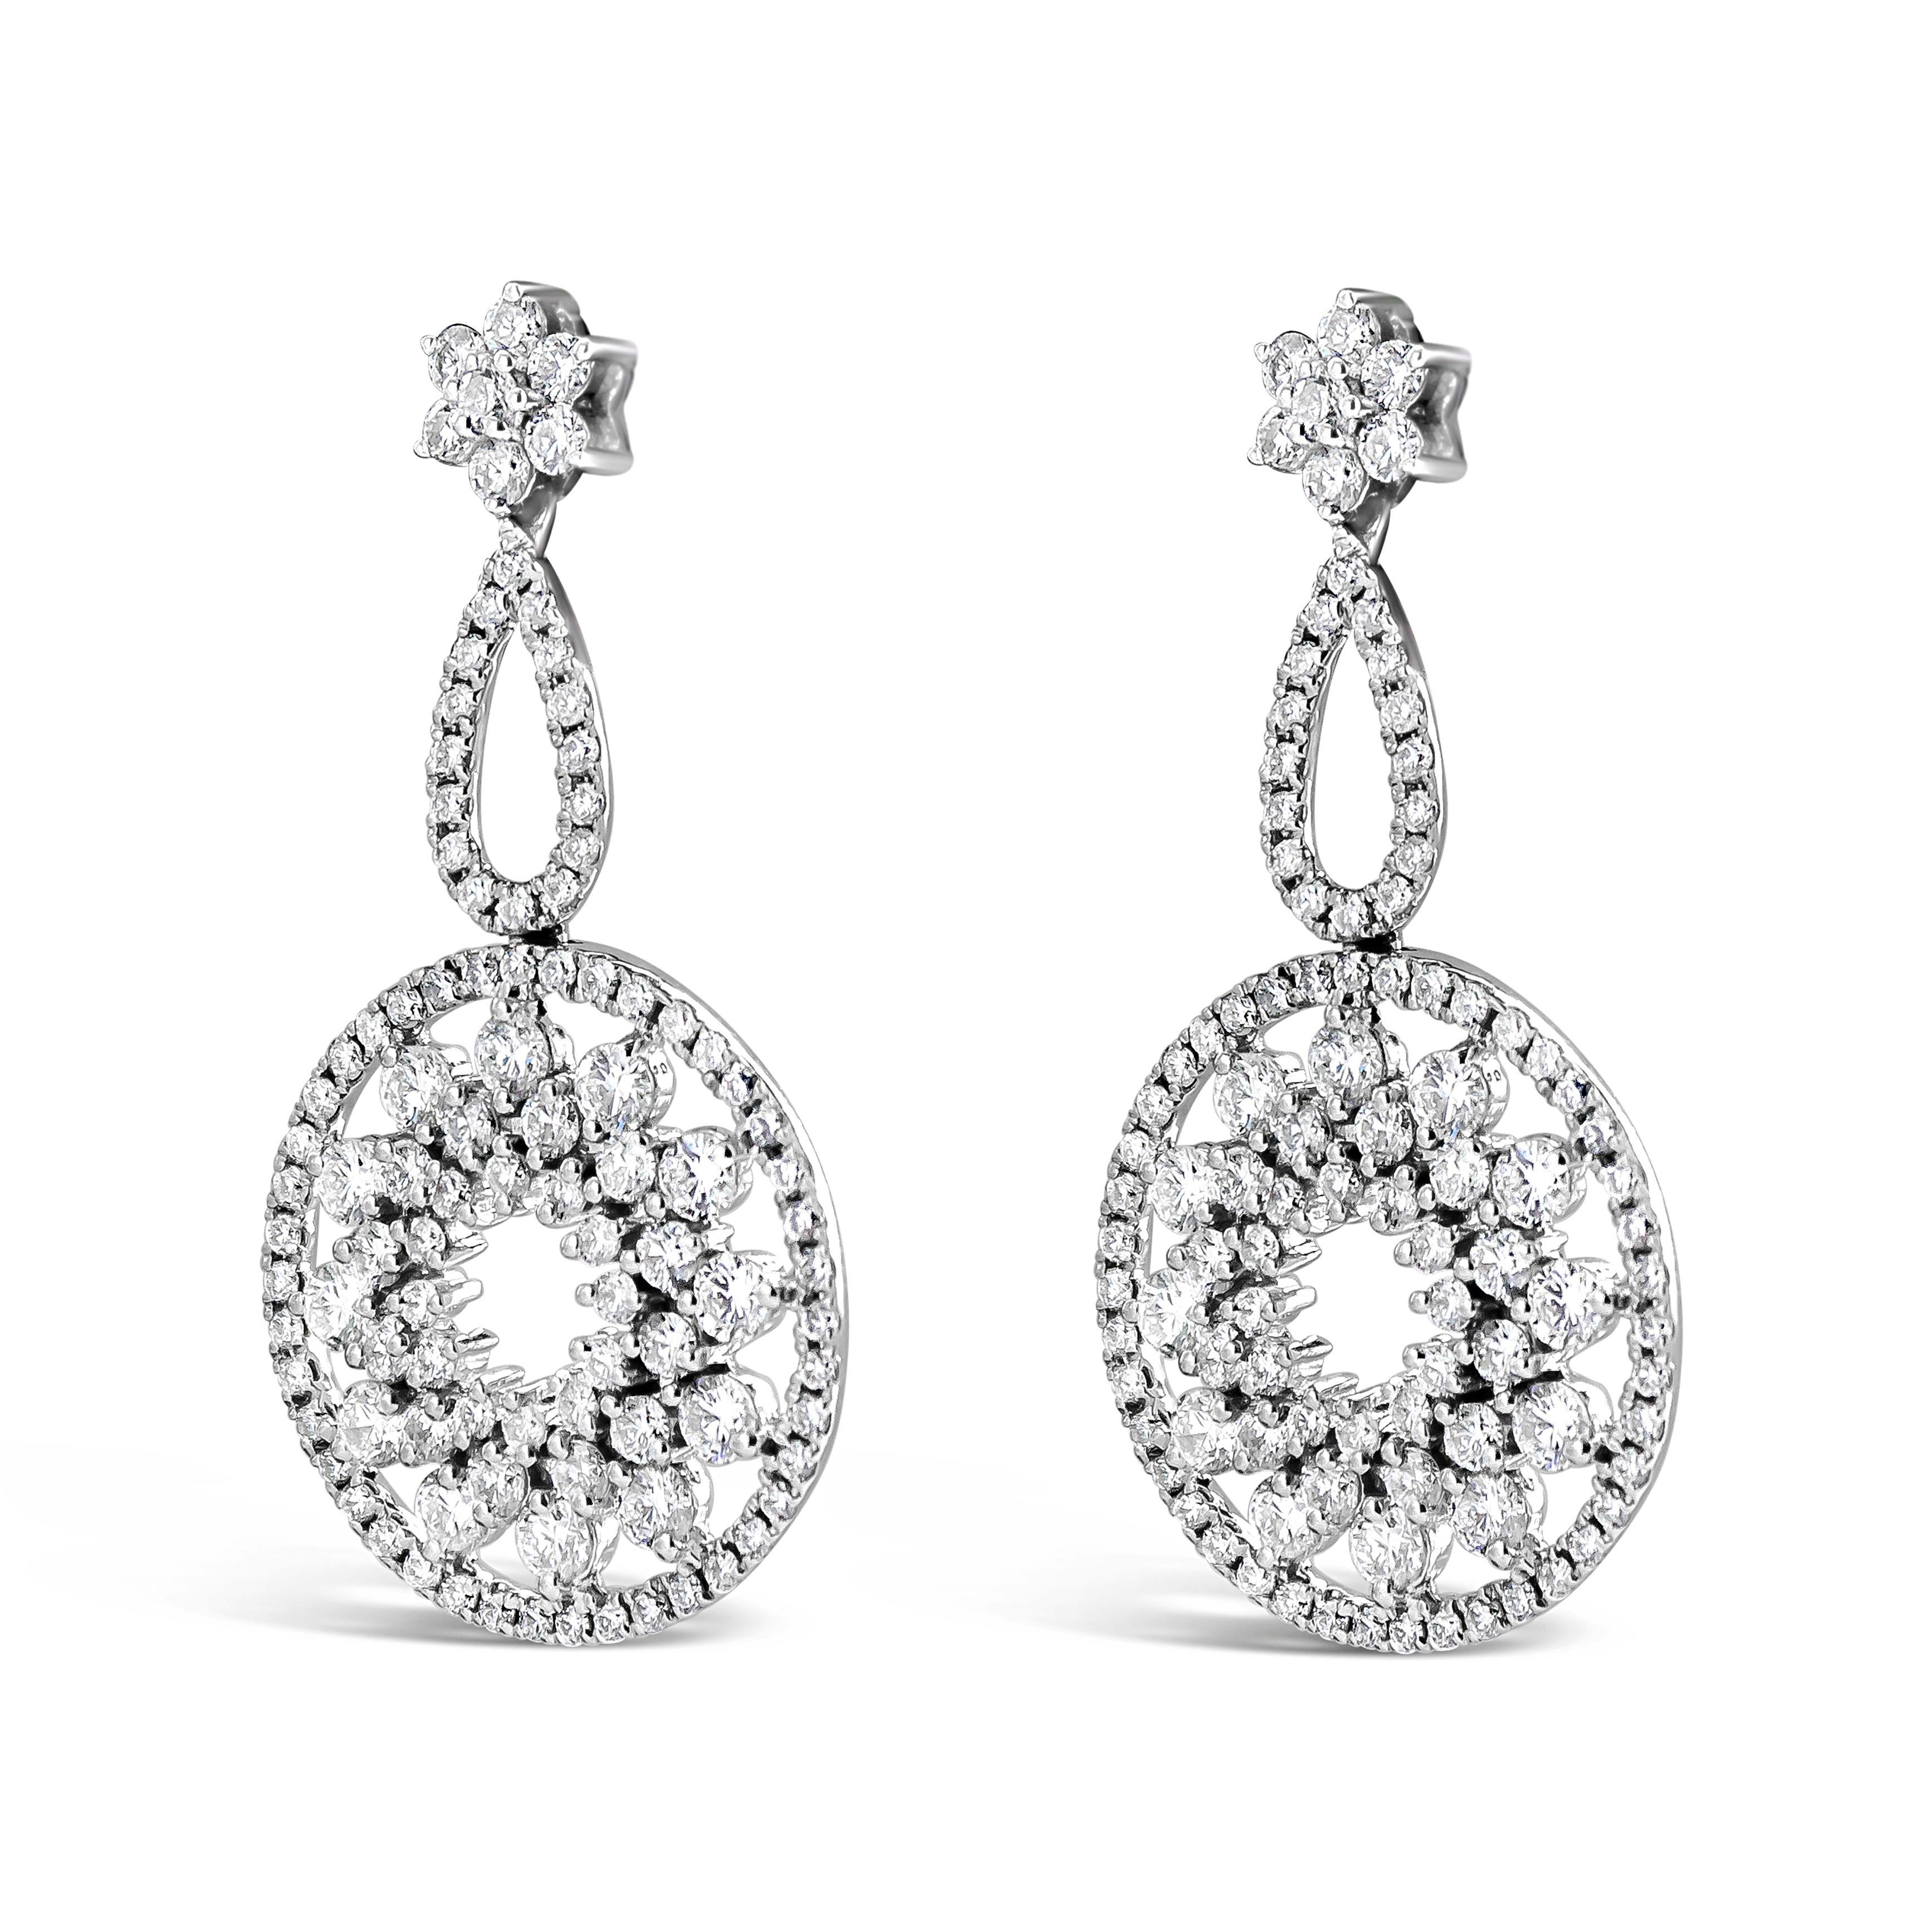 A luxurious pair of chandelier earrings showcasing round brilliant diamonds set in an intricate, open-work arabesque design. Diamonds weigh 2.42 carats total. Made in 18K White Gold

Style available in different price ranges. Prices are based on